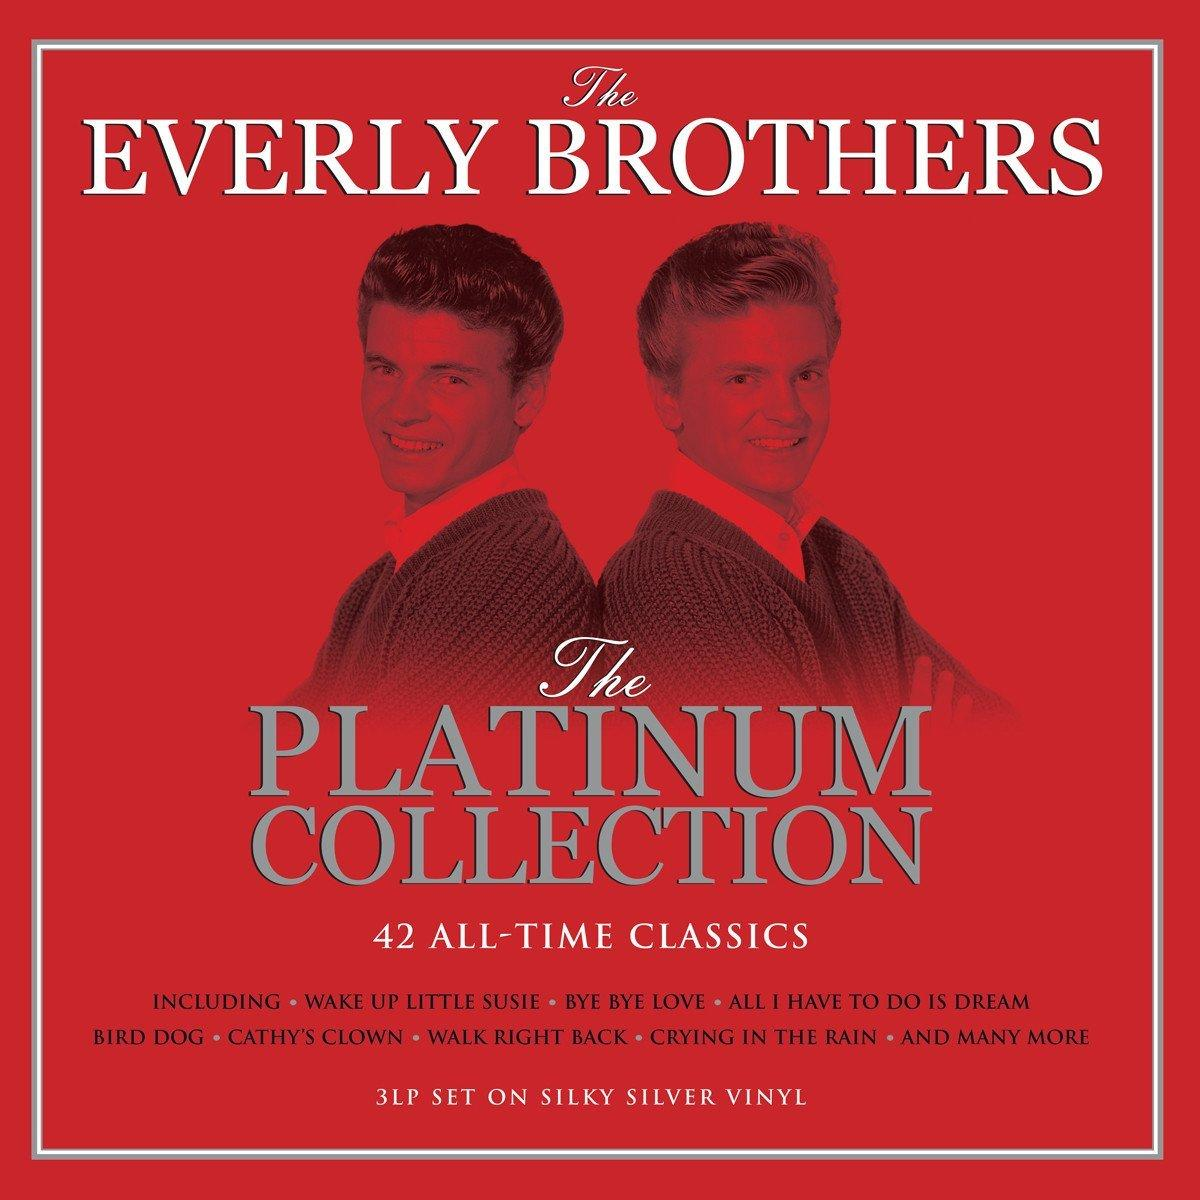 (rotes The (Vinyl) - Everly - Collection Platinum Vinyl) Brothers